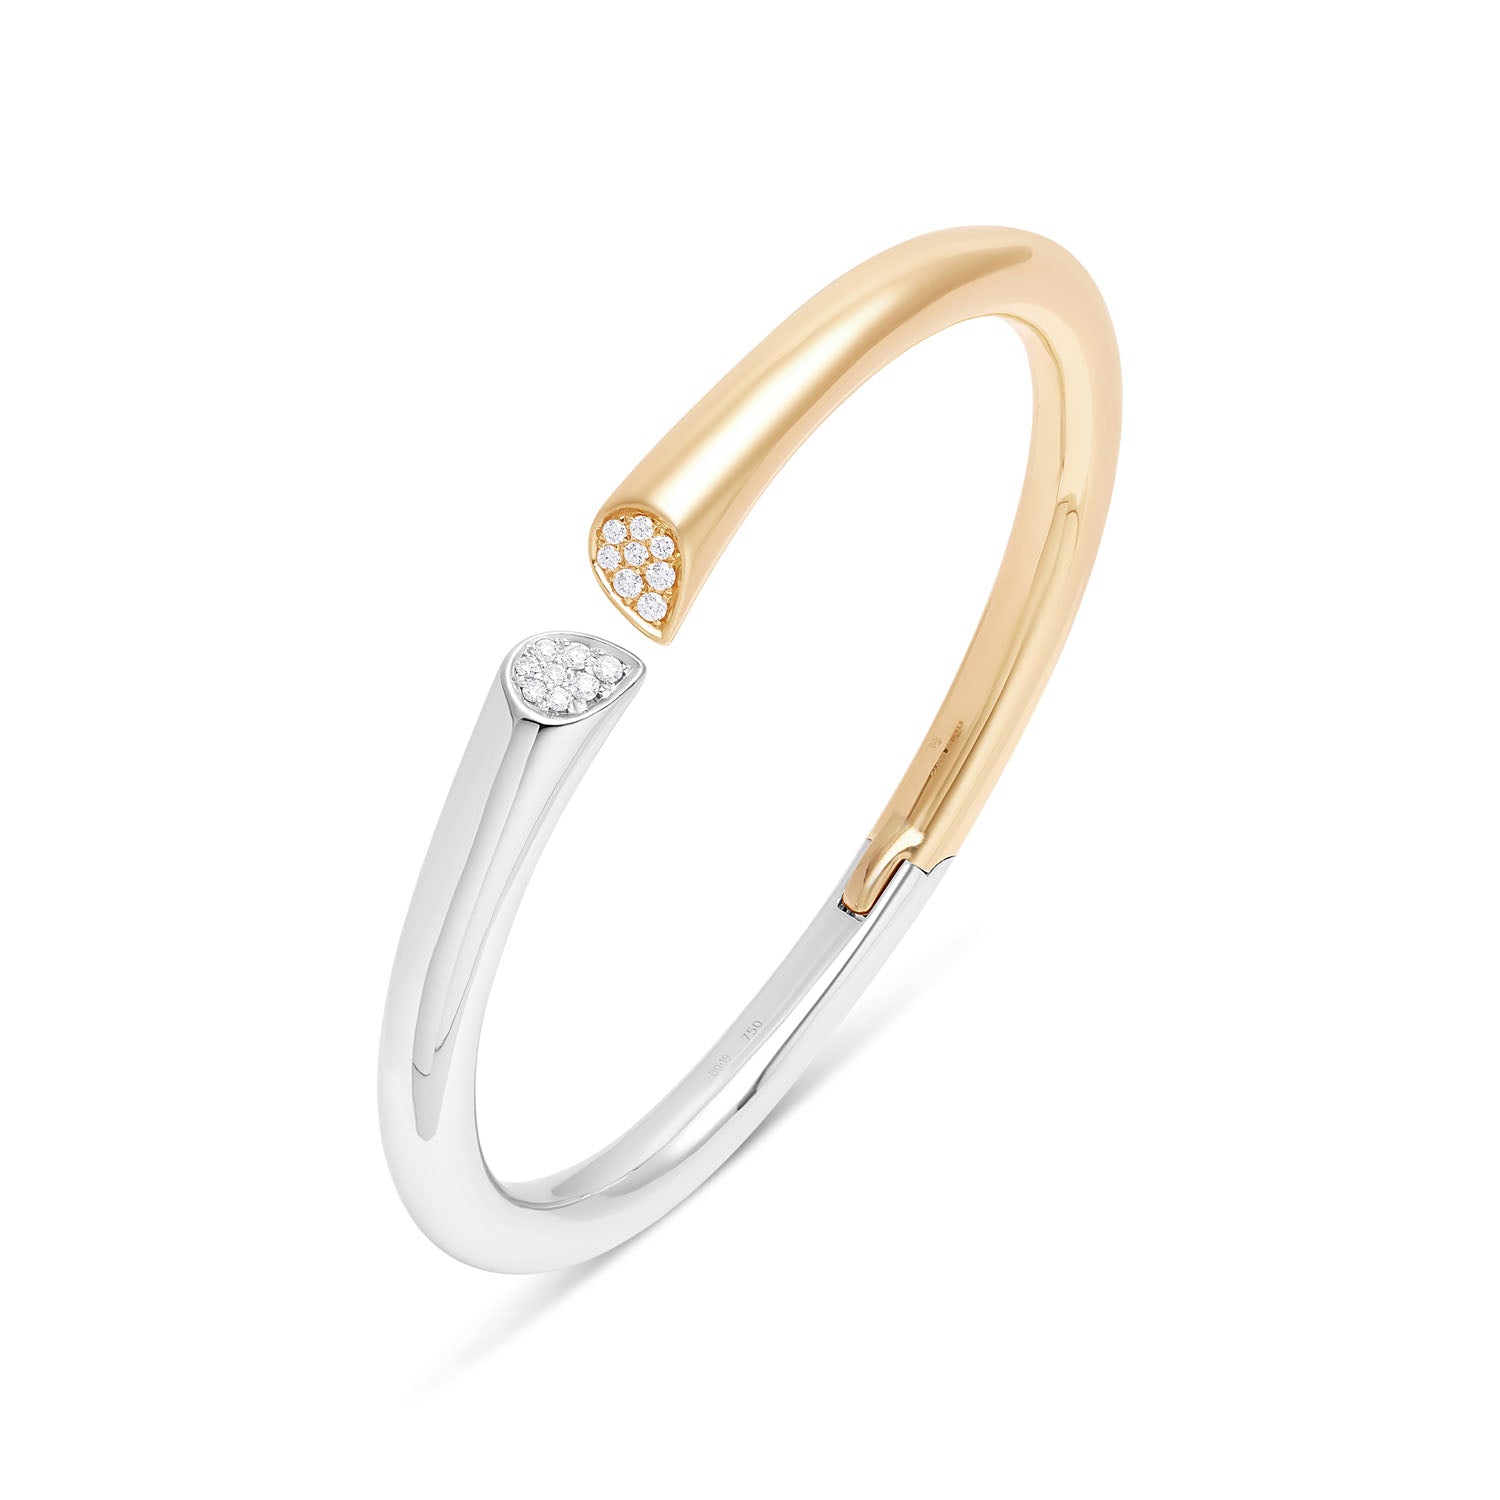 Whispers of Love Diamond Bangle - Two Tone Gold